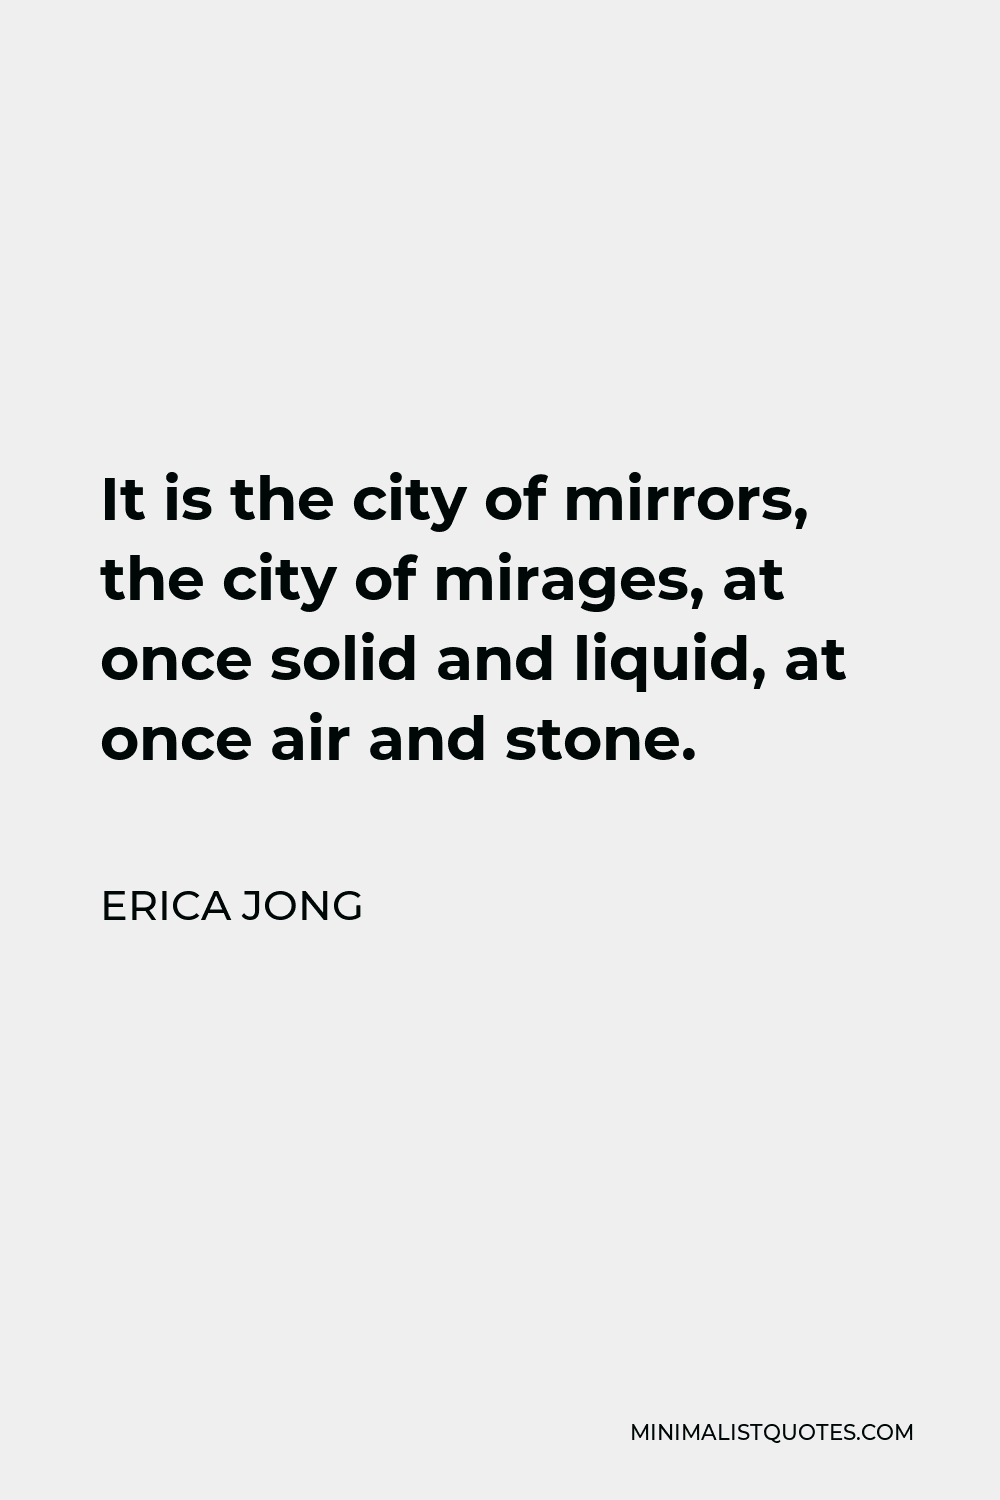 Erica Jong Quote - It is the city of mirrors, the city of mirages, at once solid and liquid, at once air and stone.